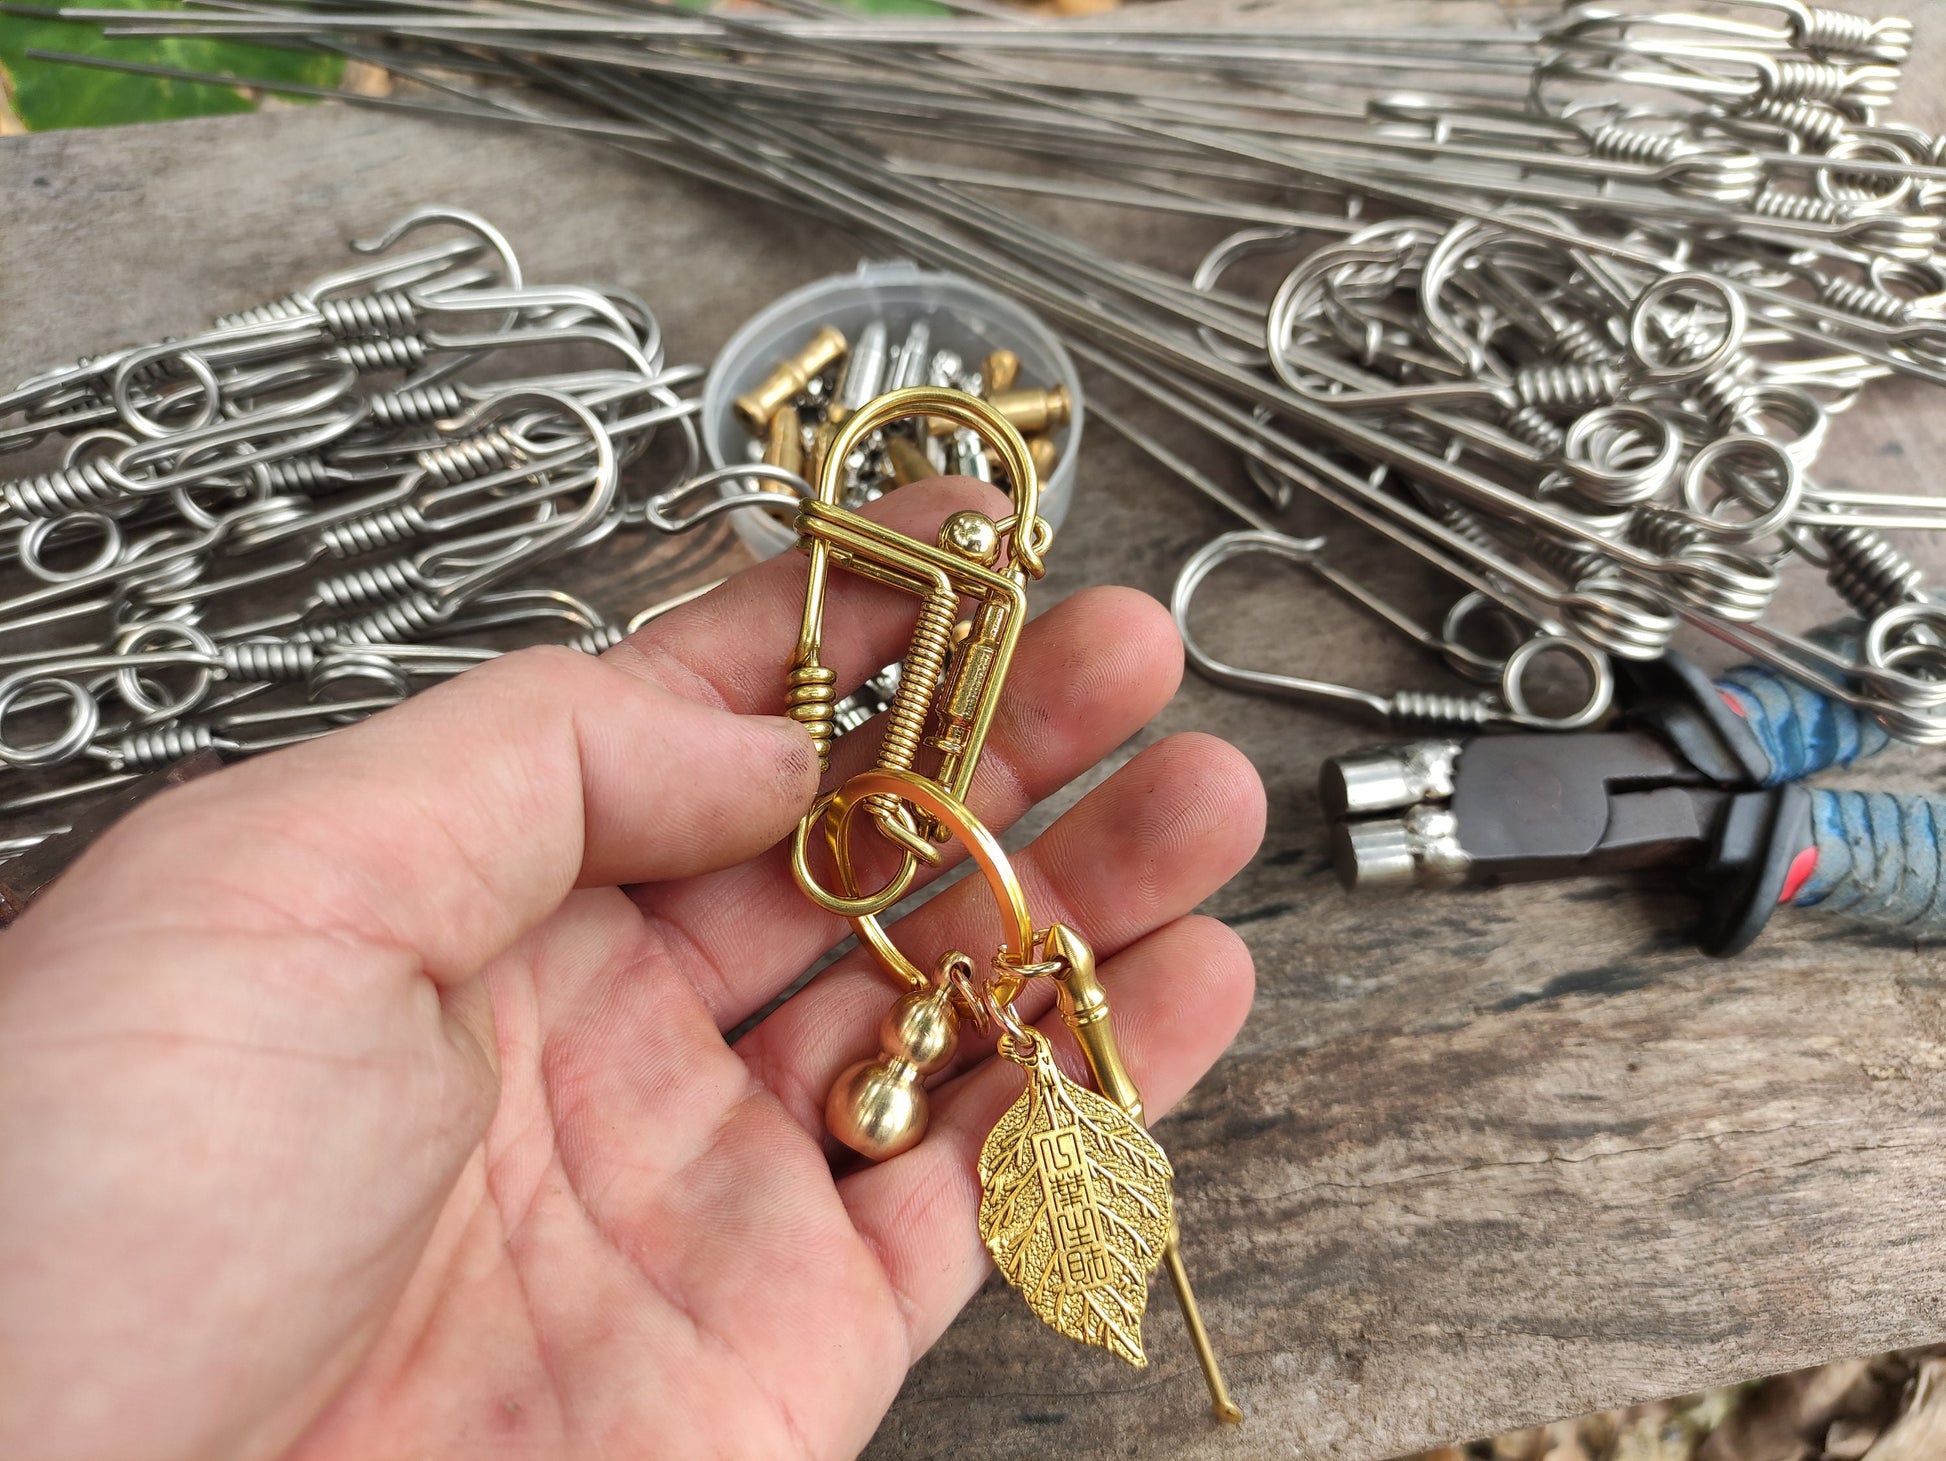 Customizable Metal Keychains For Men KR043 Brass Key Ring With Creative  Pendant Design Perfect Small Gift For Activities From Dongfangmei, $2.19